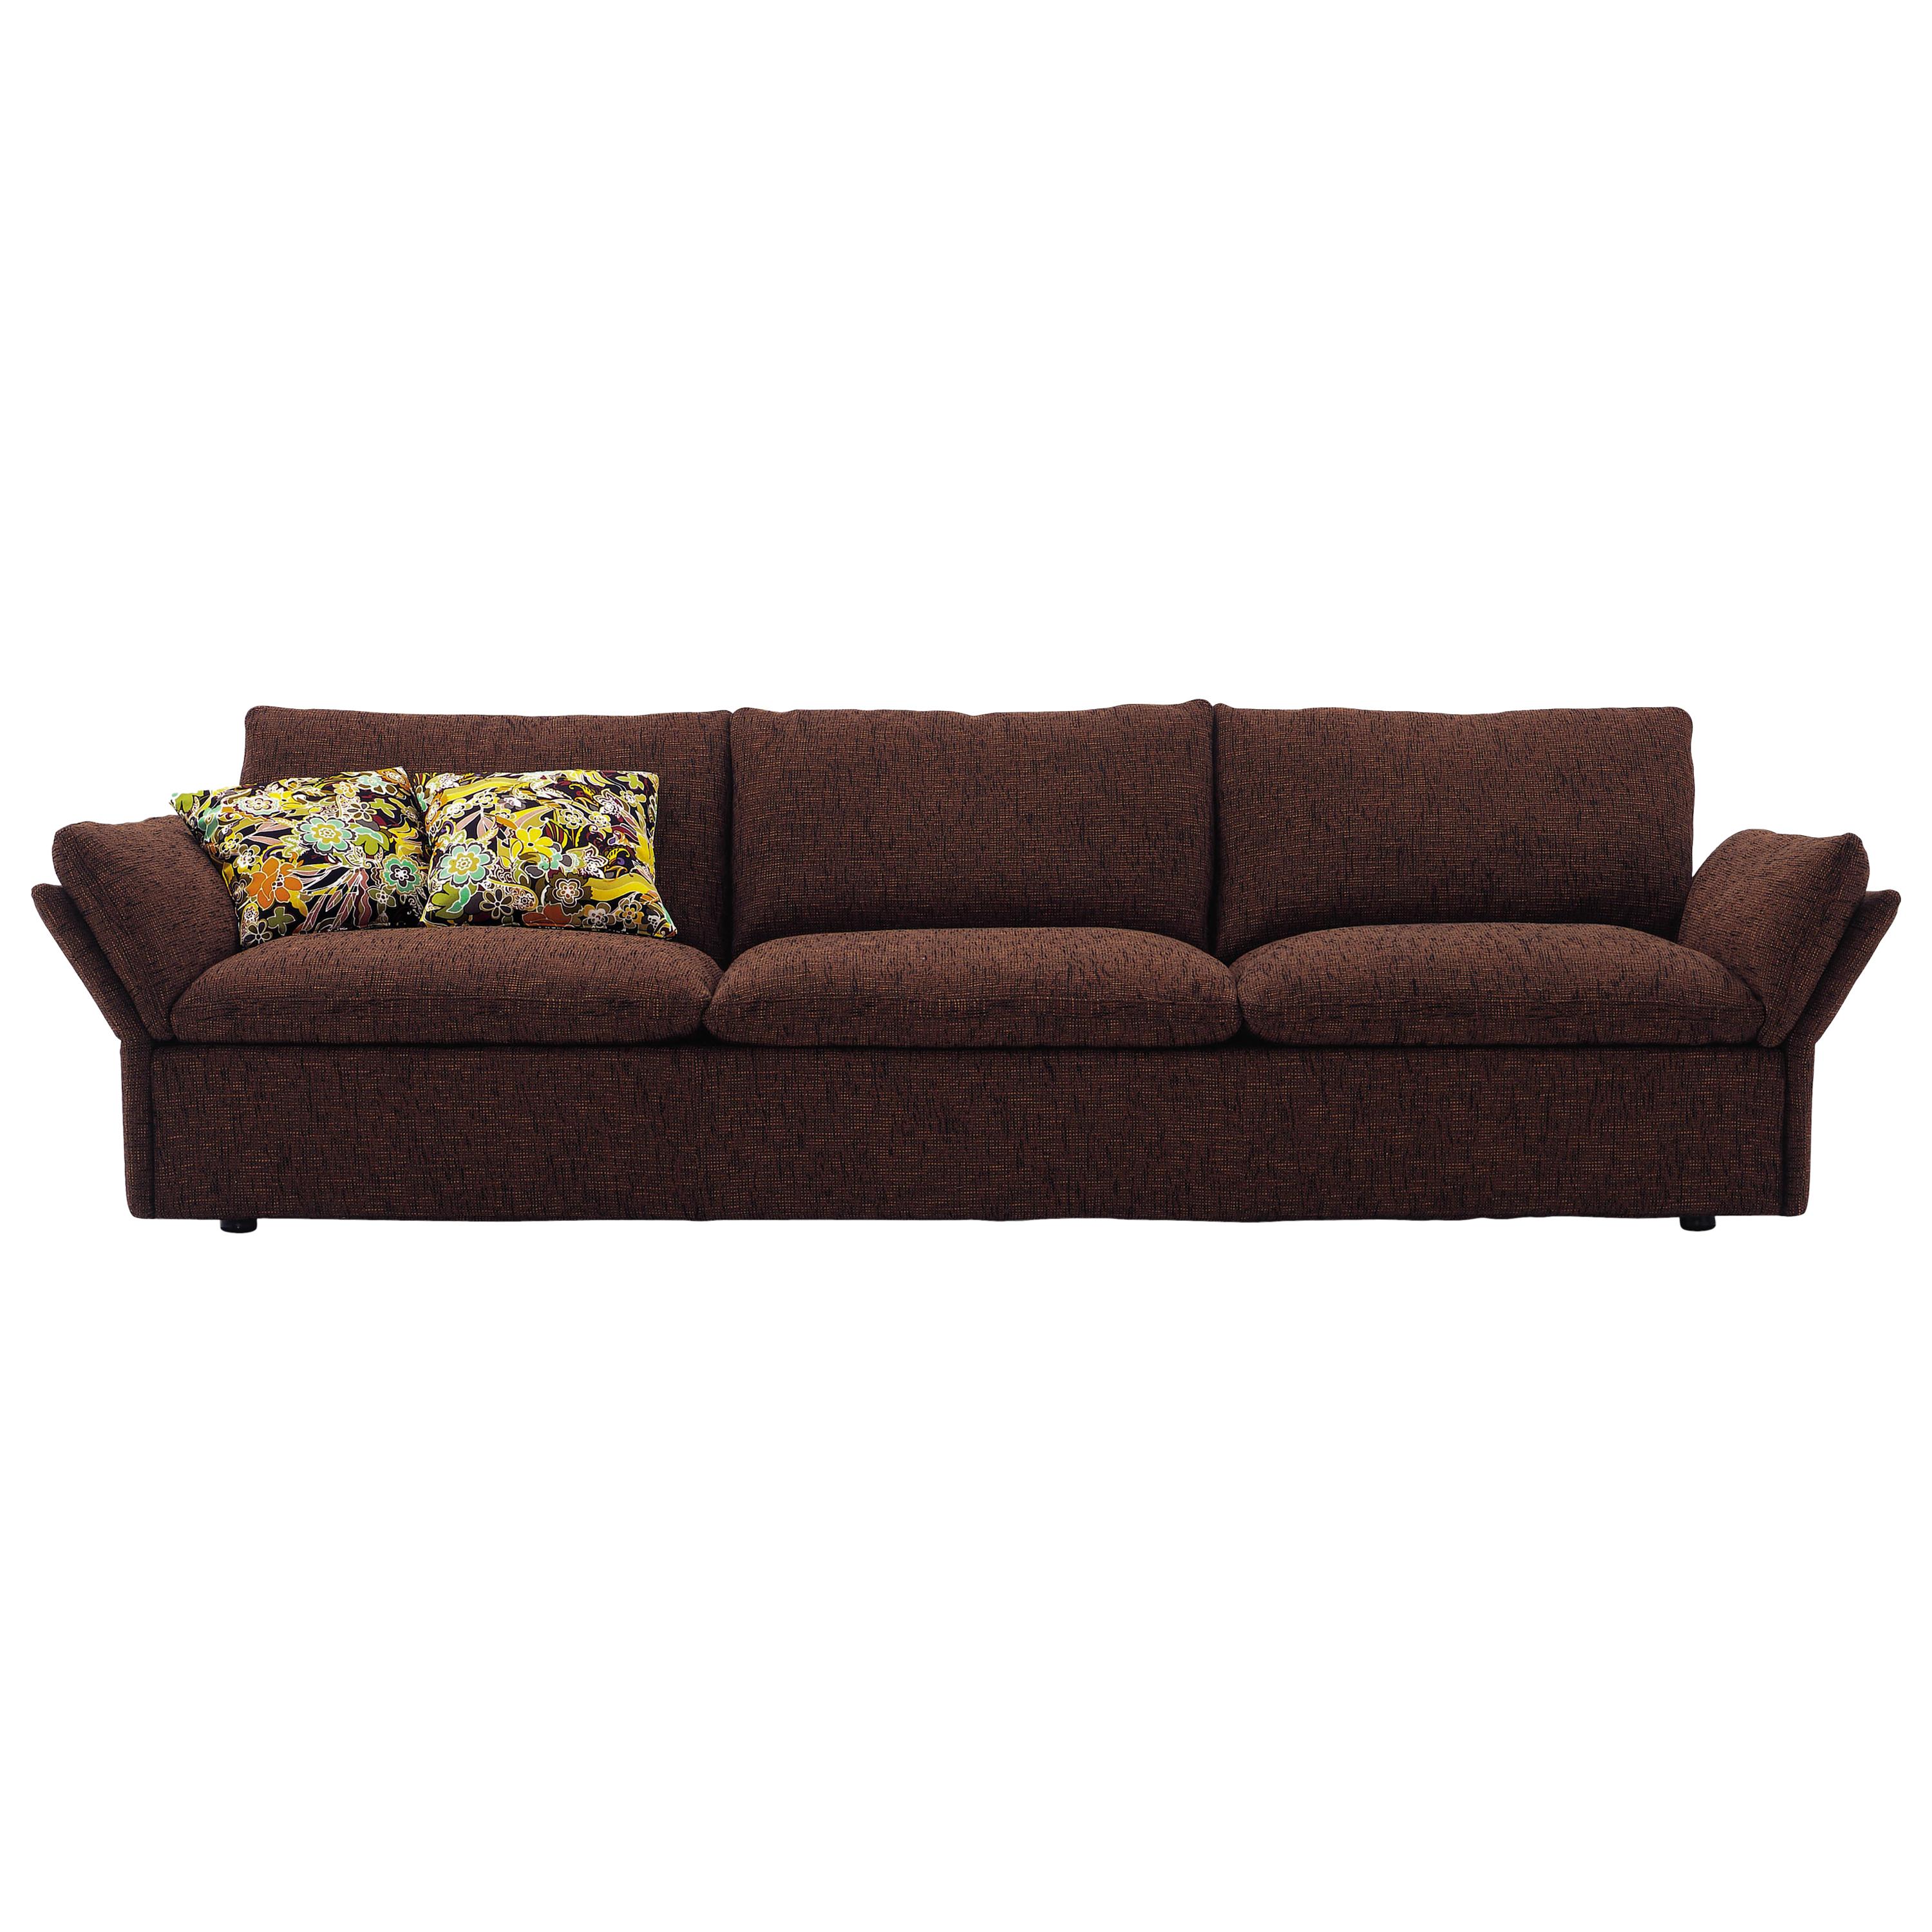 Nube Italia Tempt Sofa in Light Beige Fabric by Kemistry of Style